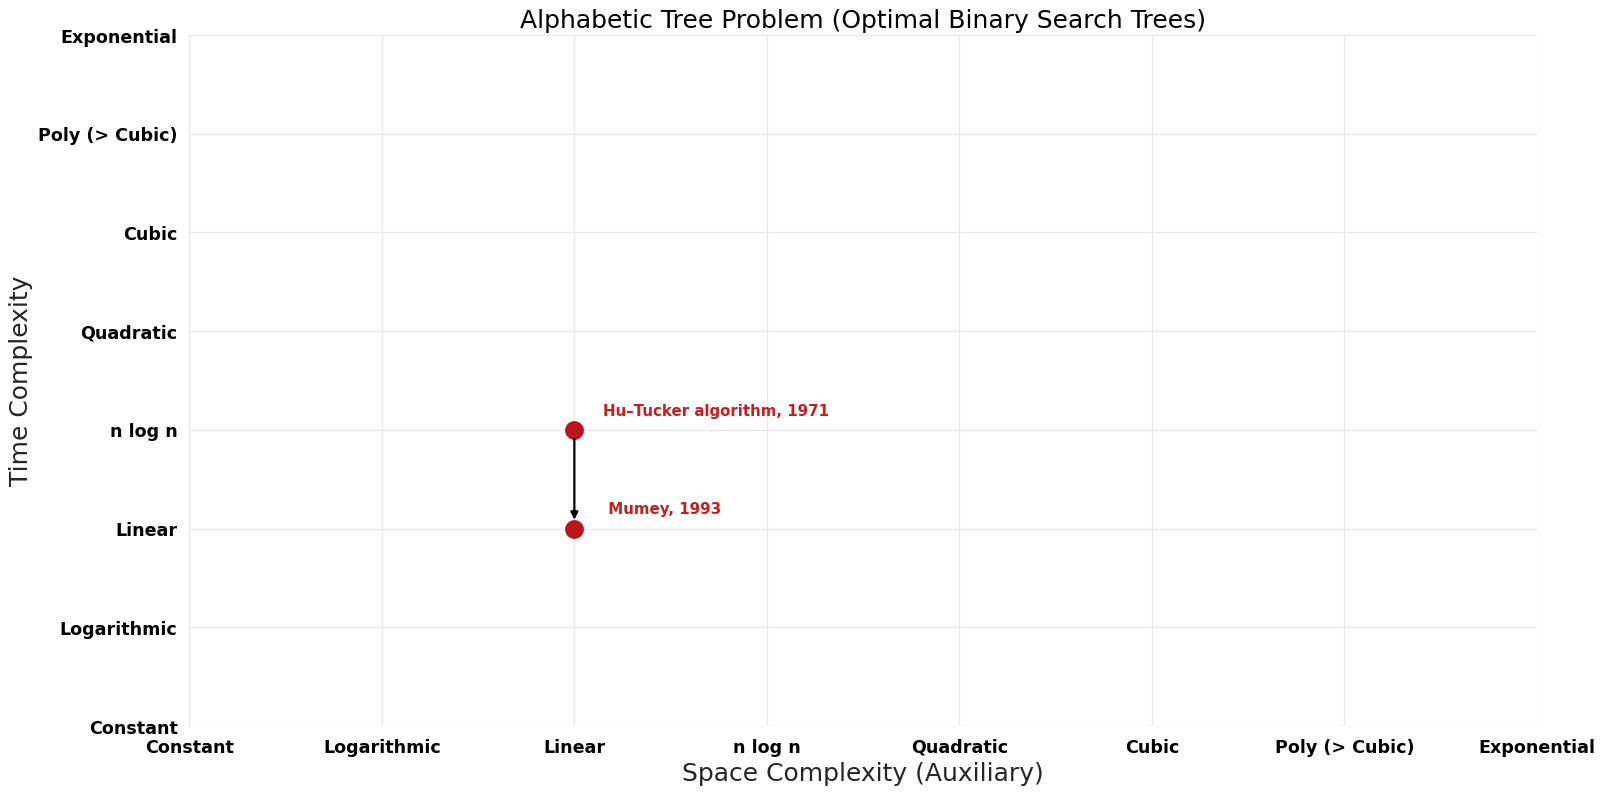 File:Optimal Binary Search Trees - Alphabetic Tree Problem - Pareto Frontier.png